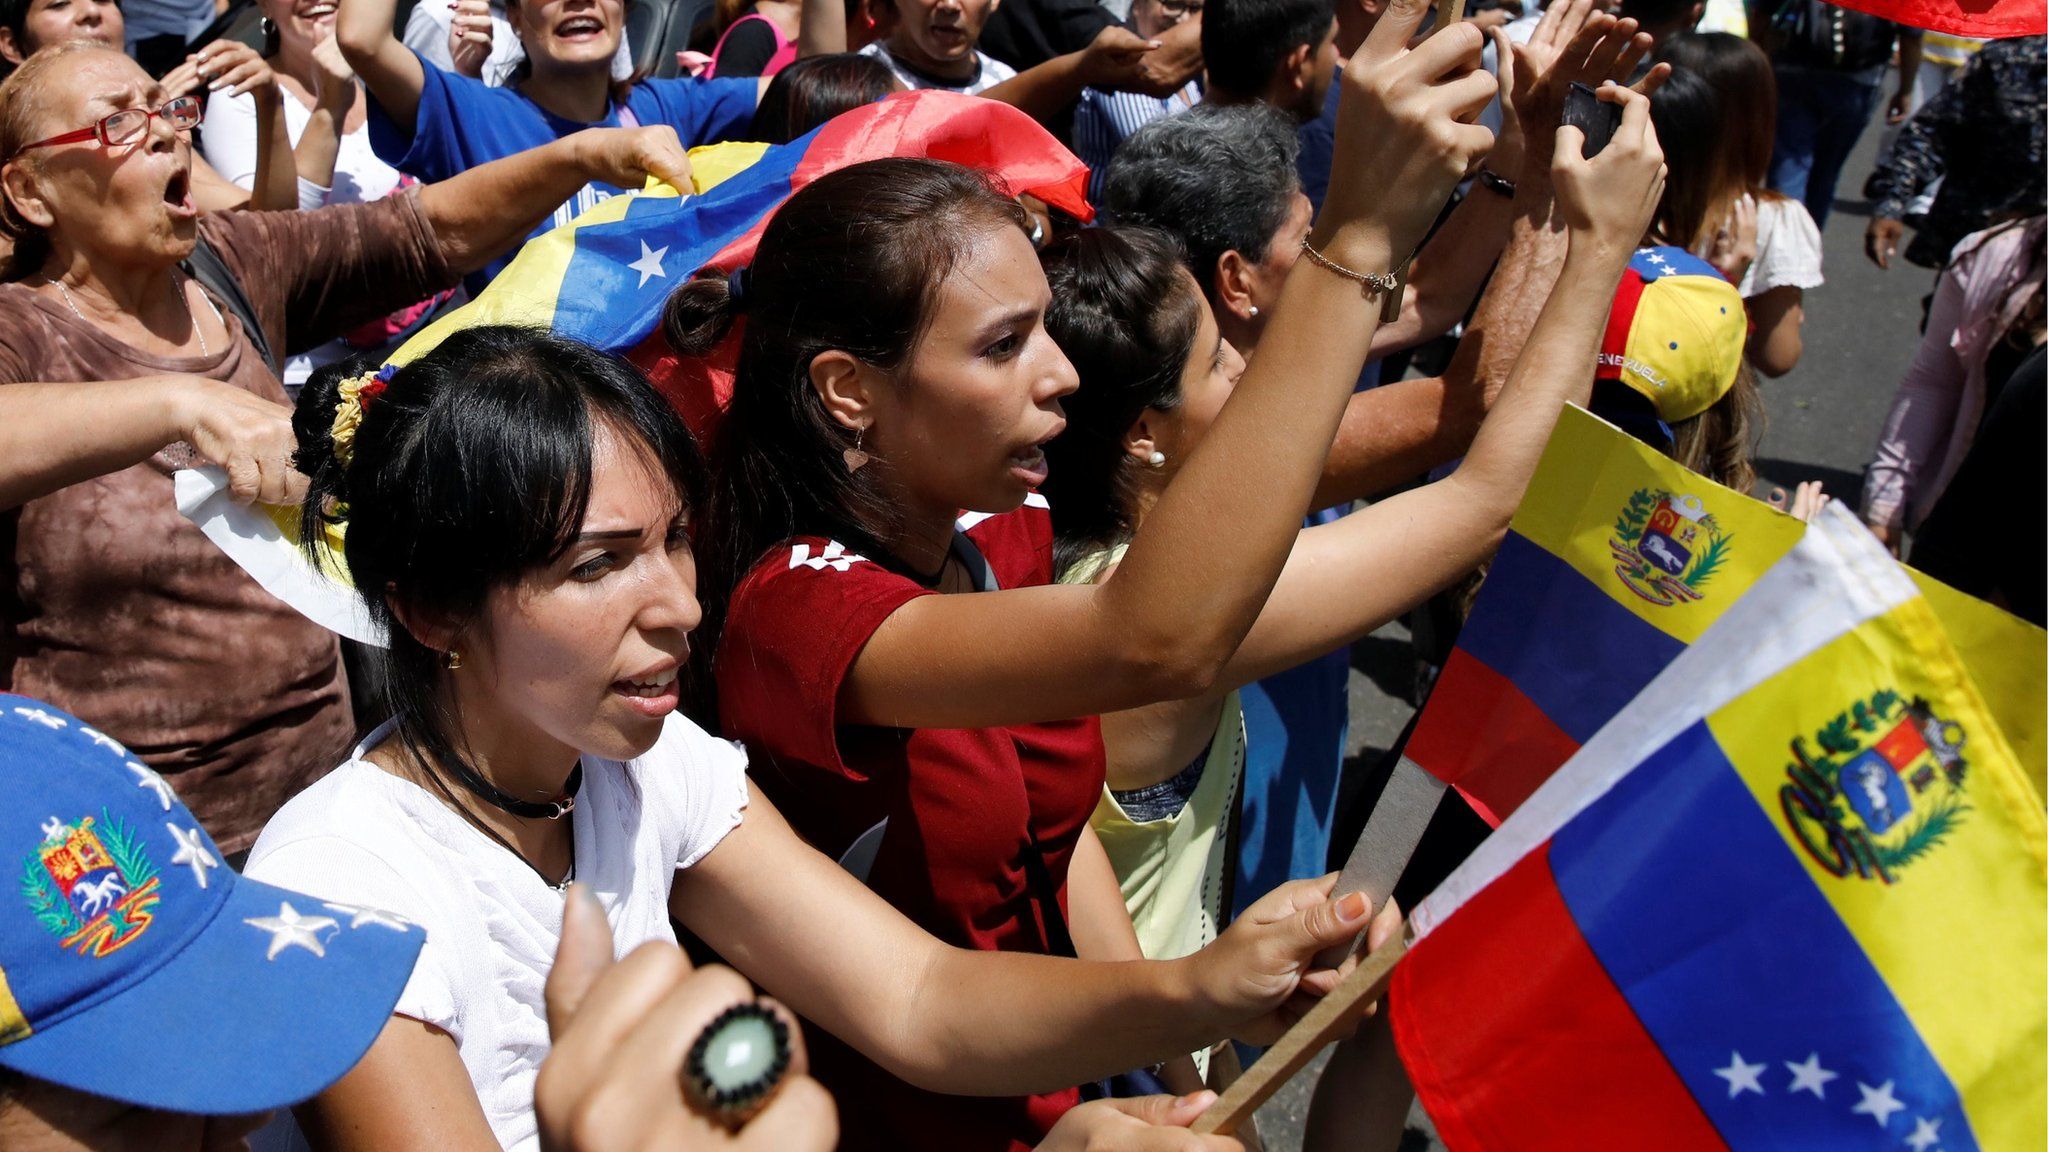 People chant slogans against President Maduro near a polling station in Caracas